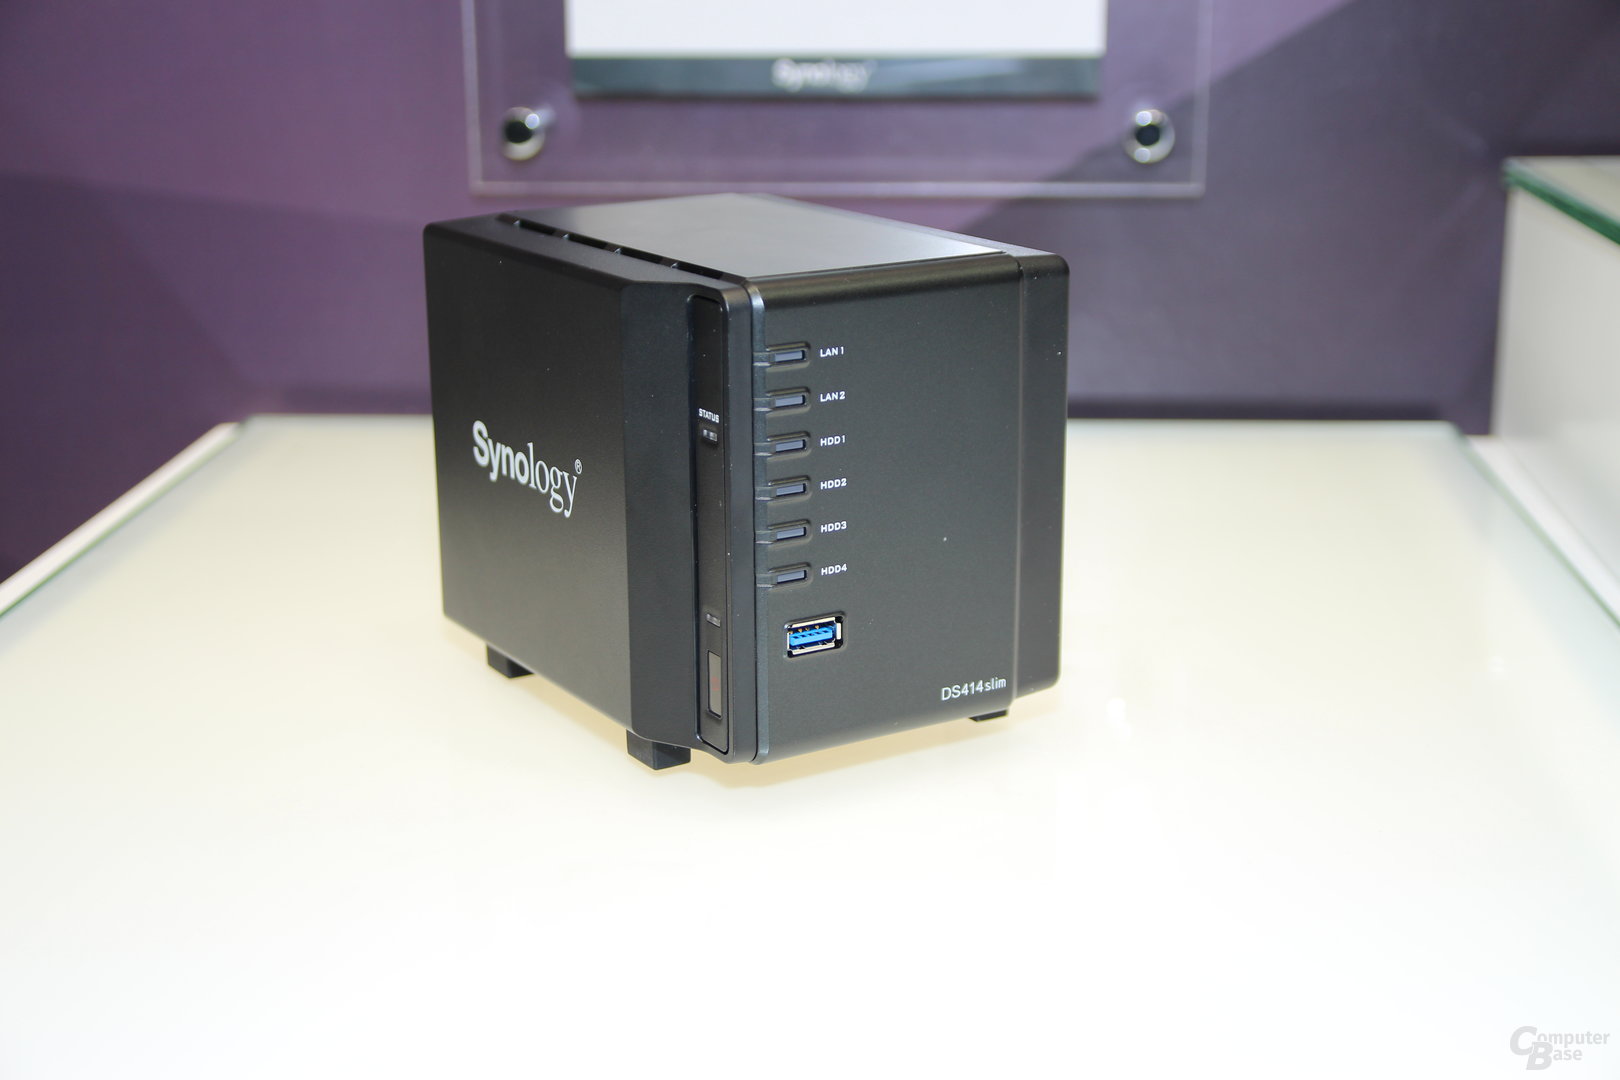 Synology DS414slim